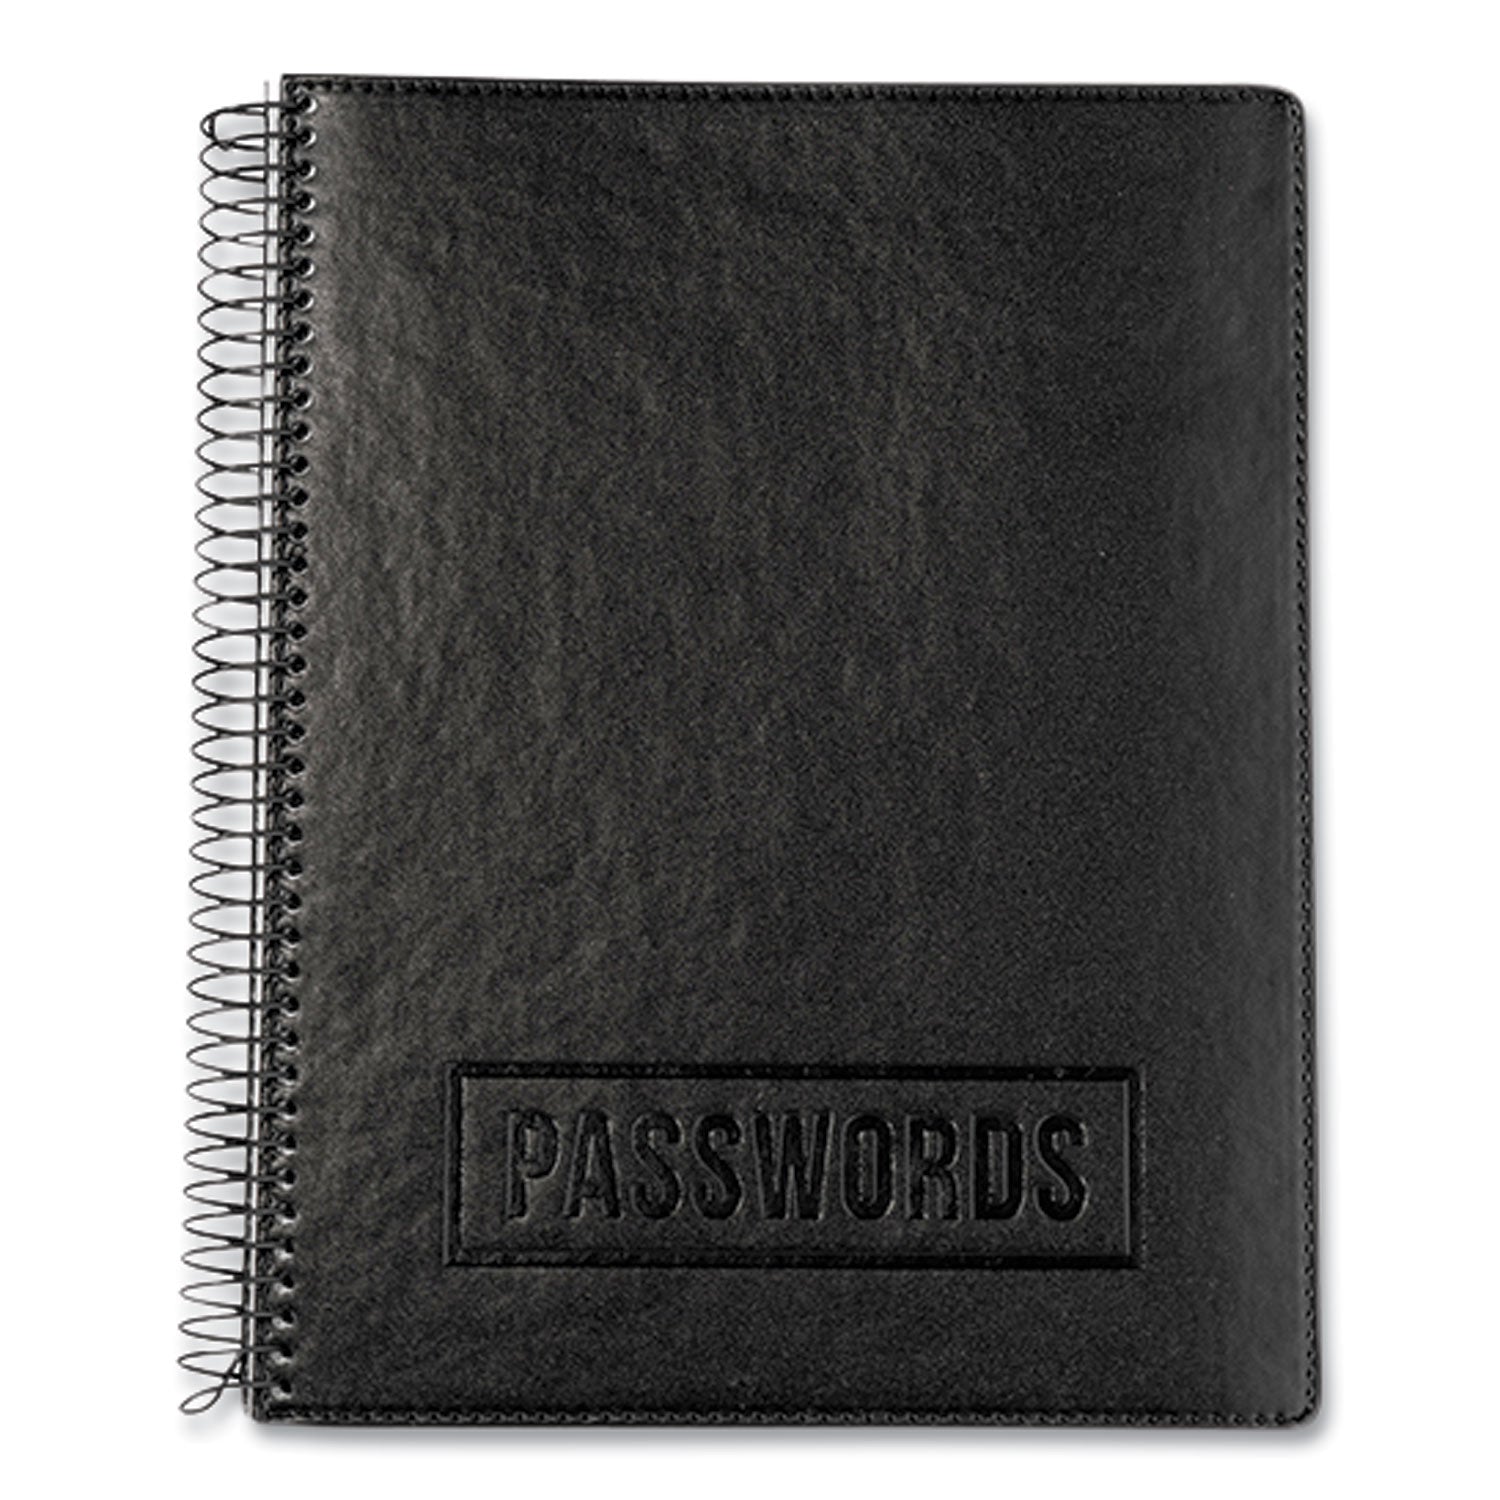 executive-format-password-log-book-576-total-entries-4-entries-page-black-faux-leather-cover-72-10-x-76-sheets_rfcexpwbookblk - 1